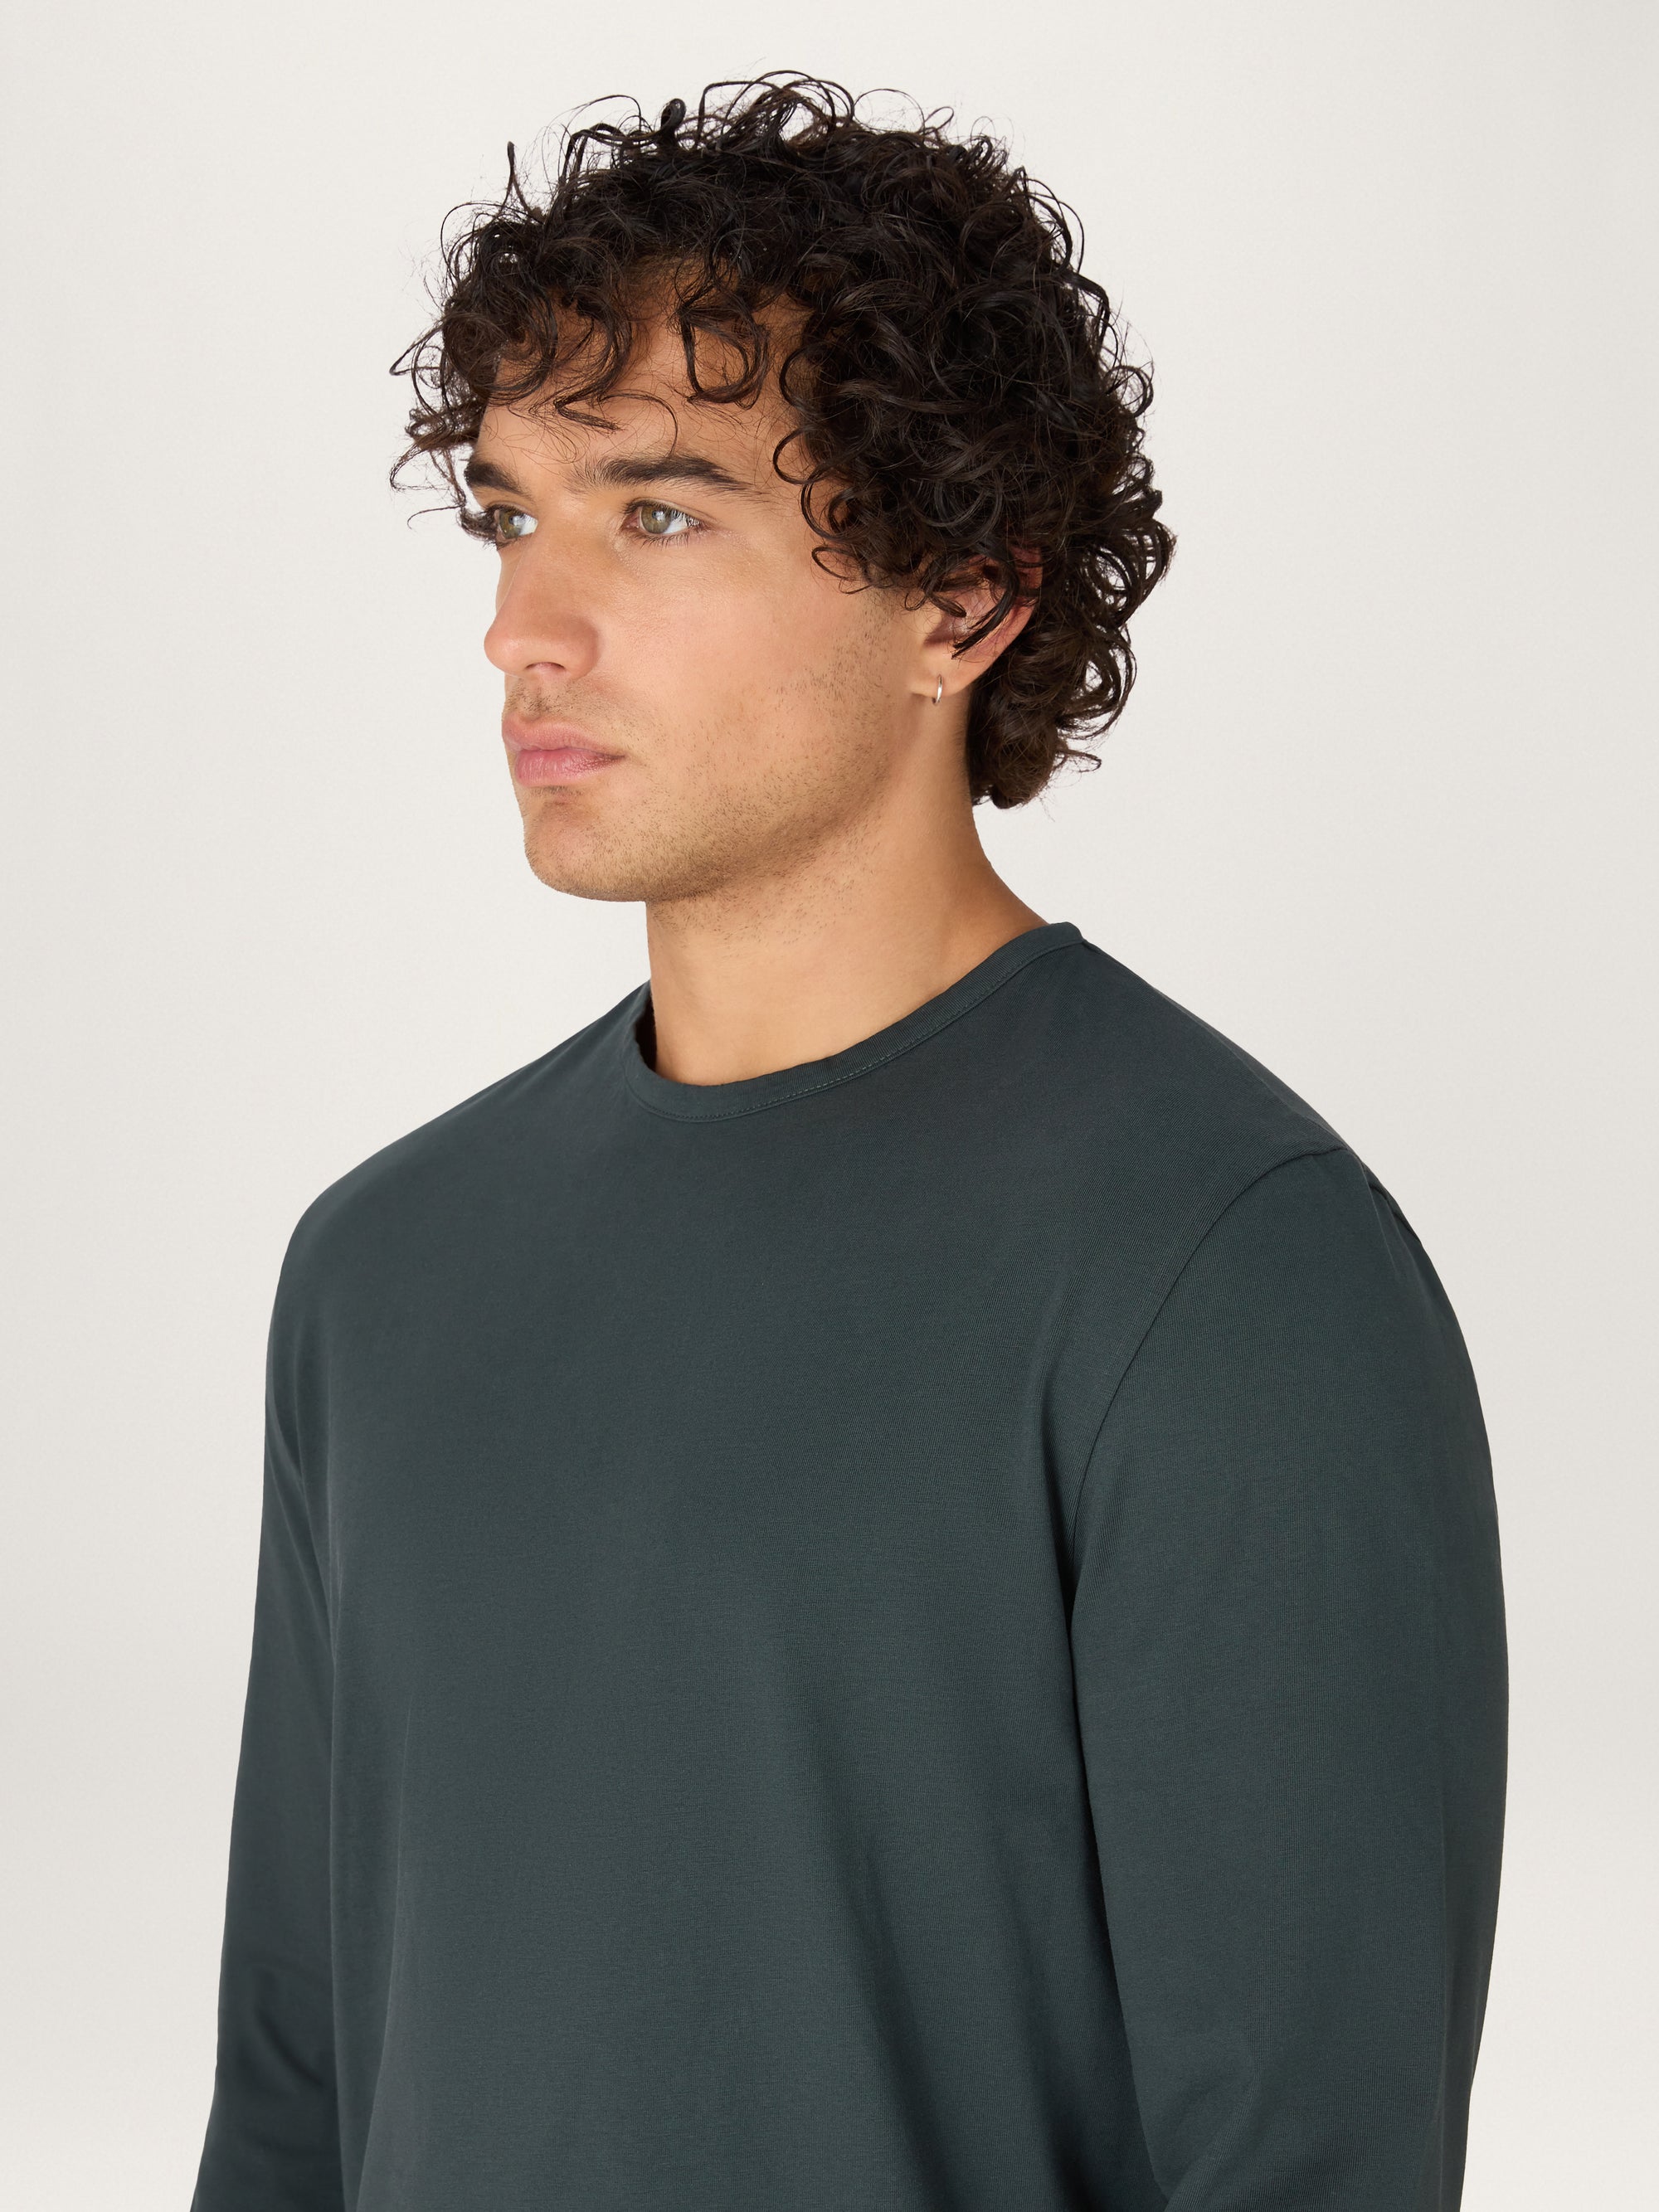 The Long Sleeve Tee || Forest Green | Organic Cotton